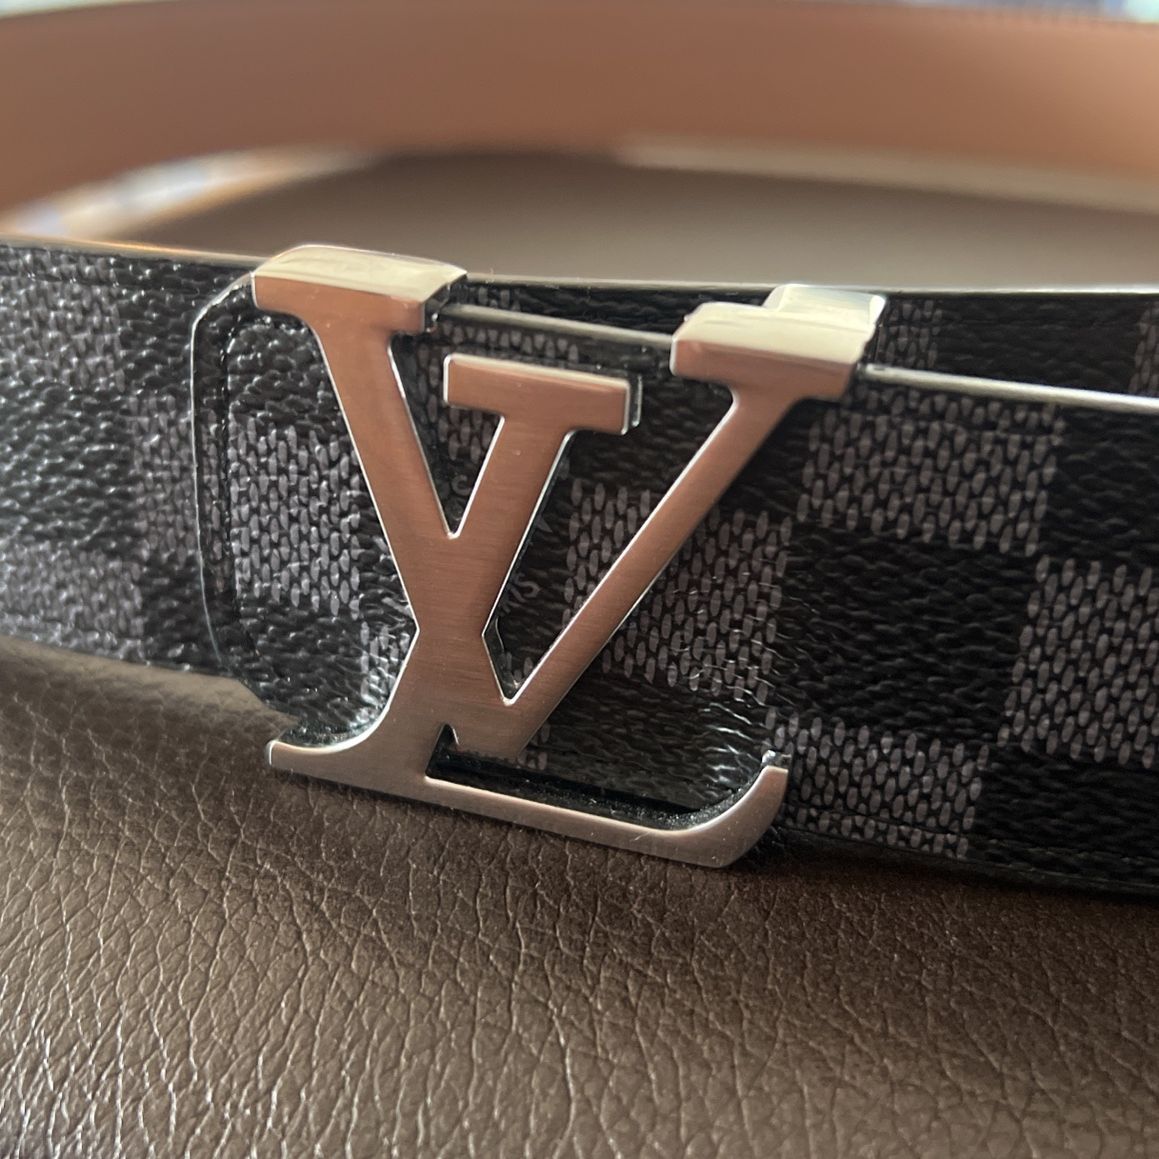 Men's LV belt for Sale in High Point, NC - OfferUp